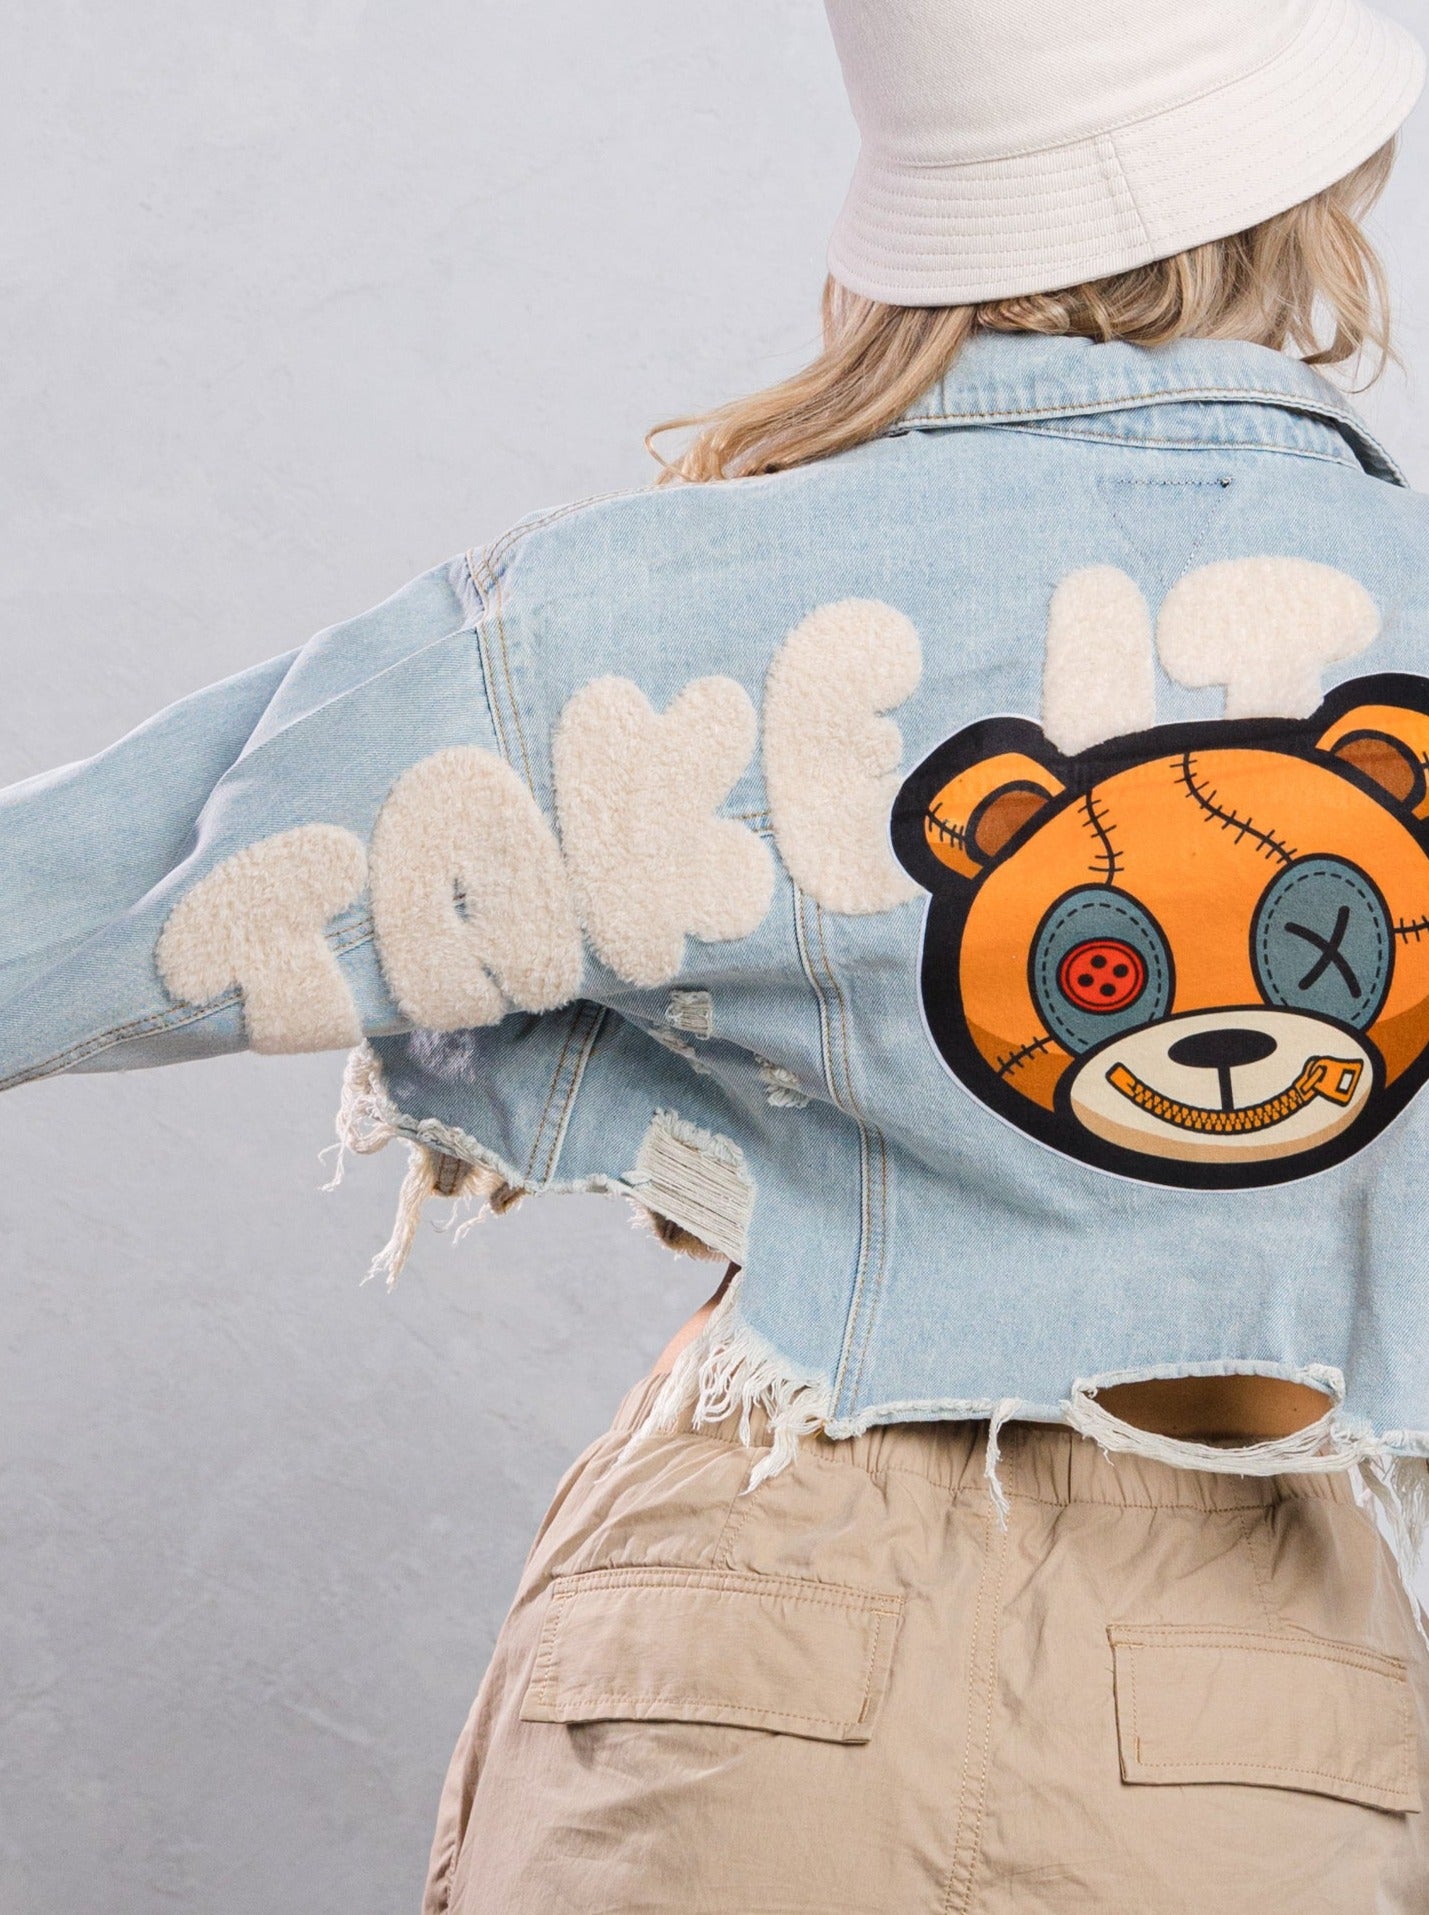 Quocoa Jean-Michel Basquiat Classic Lined Denim Jacket - Angry Dinosaur  Wearing A Basquiat Crown